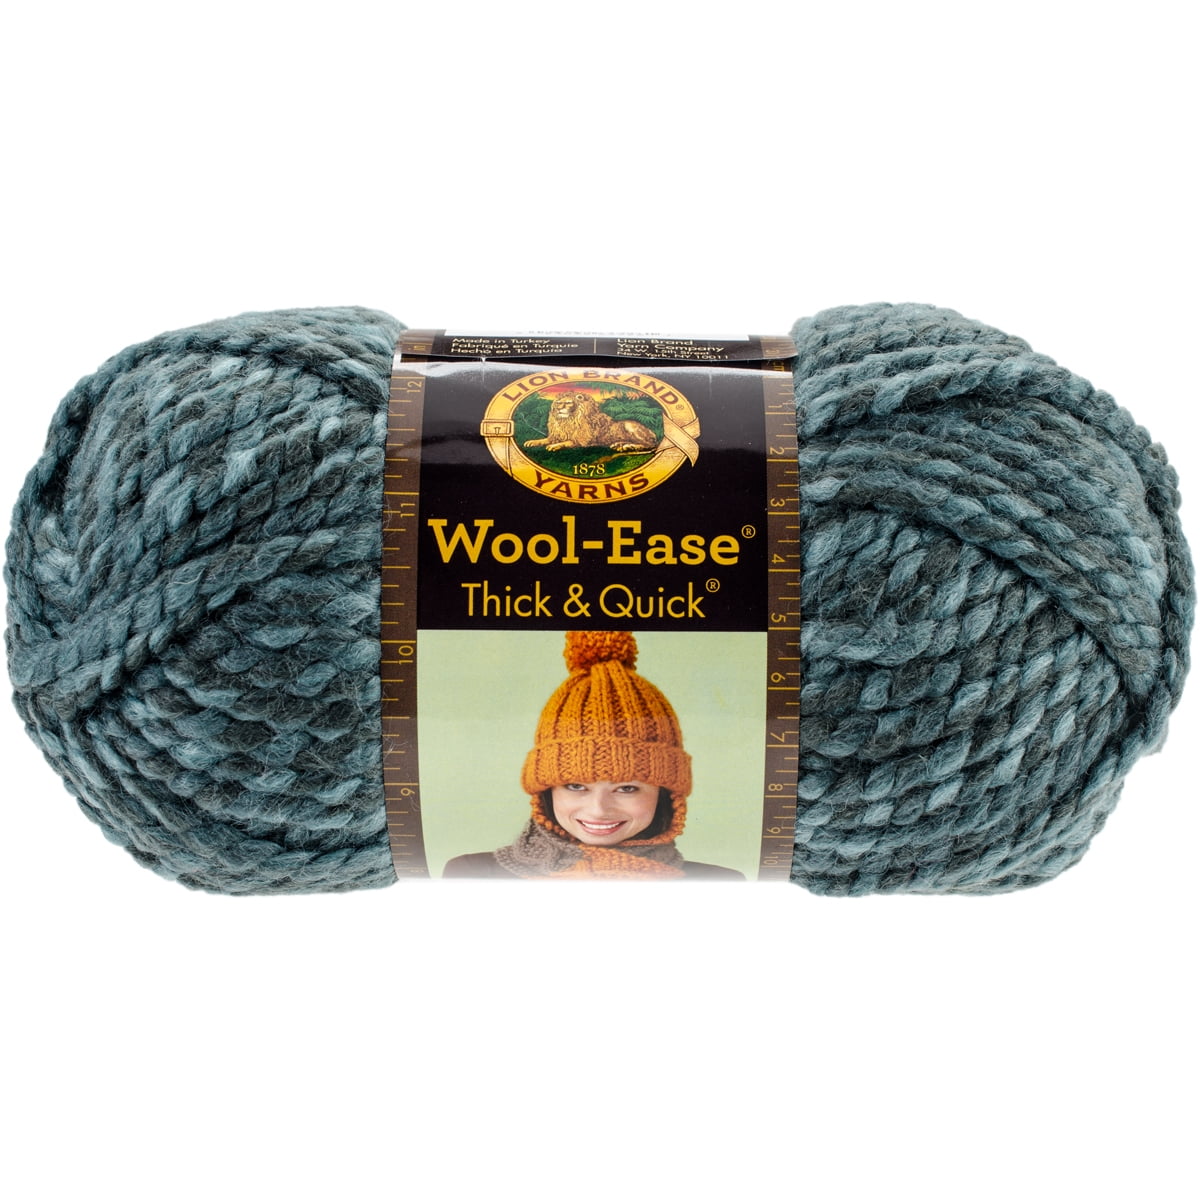  (3 Pack) 640-527 Wool-Ease Thick And Quick Yarn, 80 Meters,  Abalone3